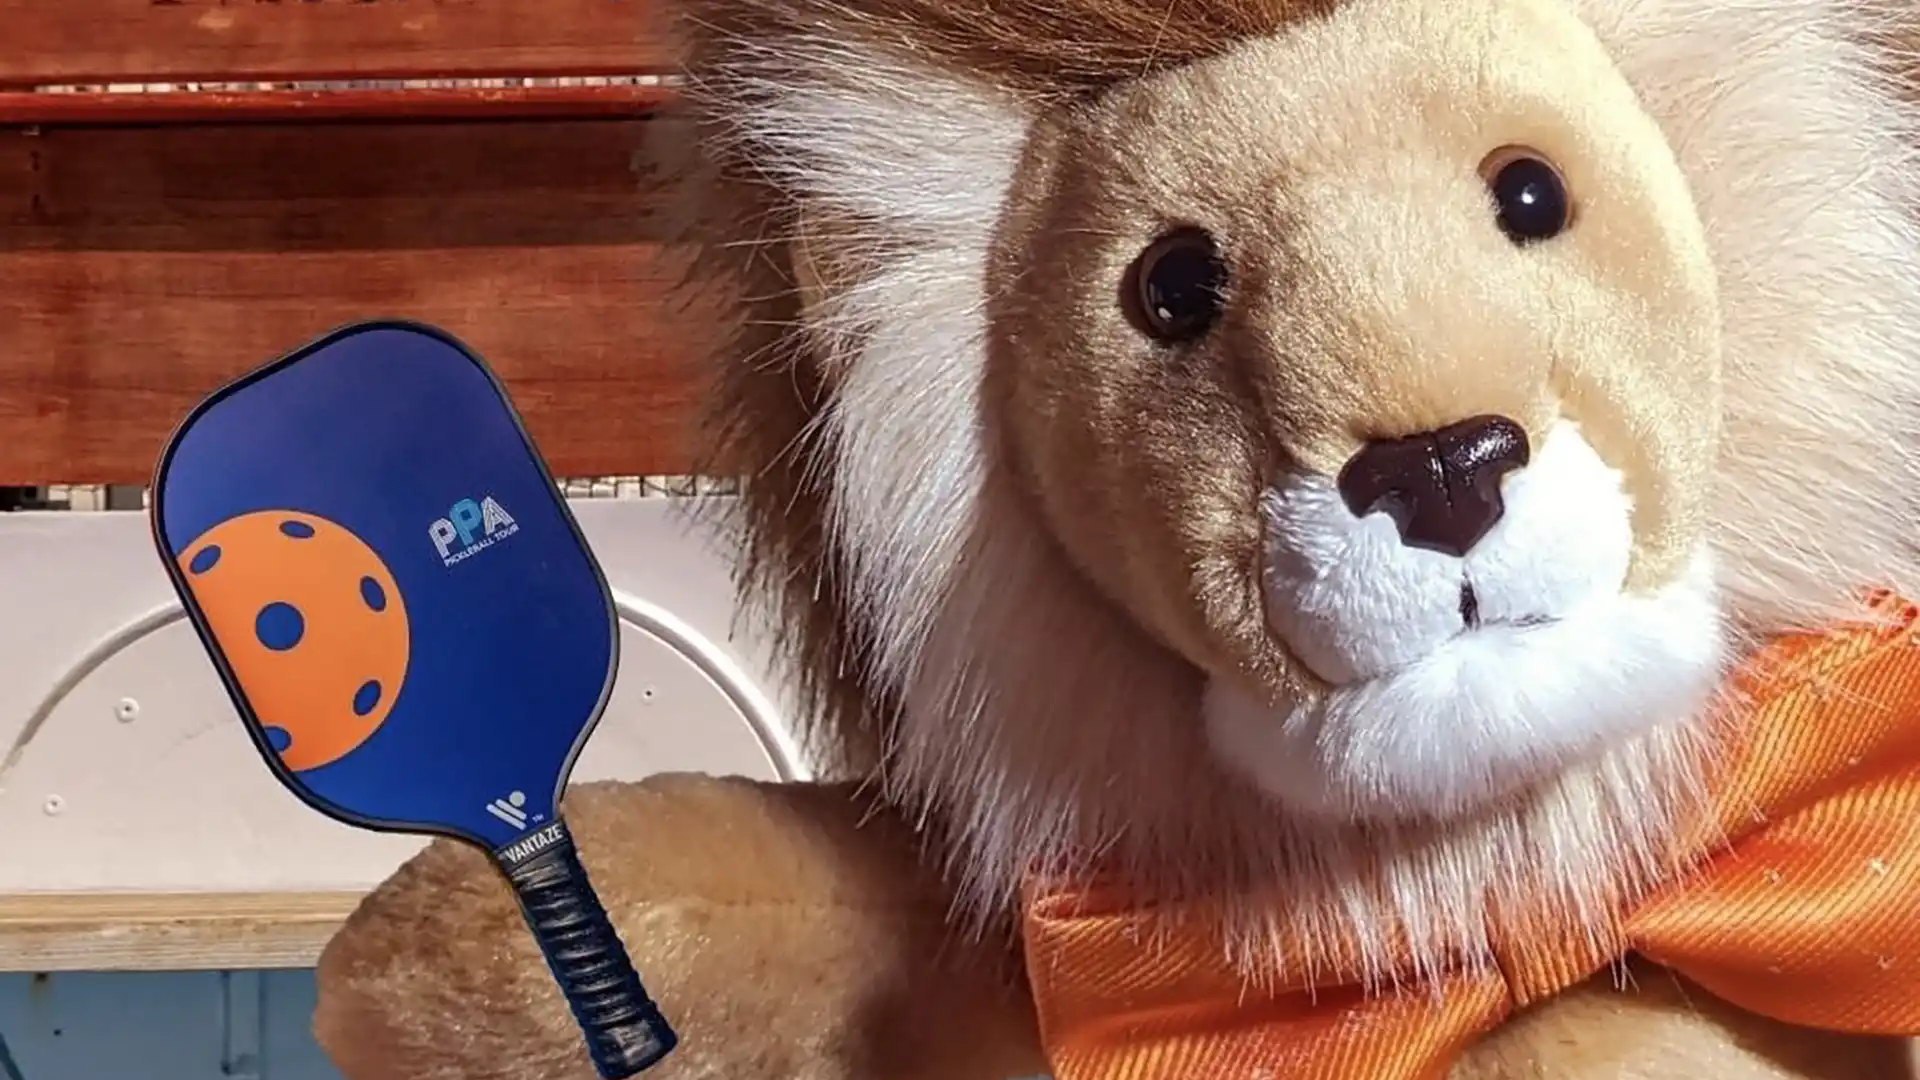 Holland America Line's lion mascot wearing orange bowtie and holding an orange and blue pickleball paddle.